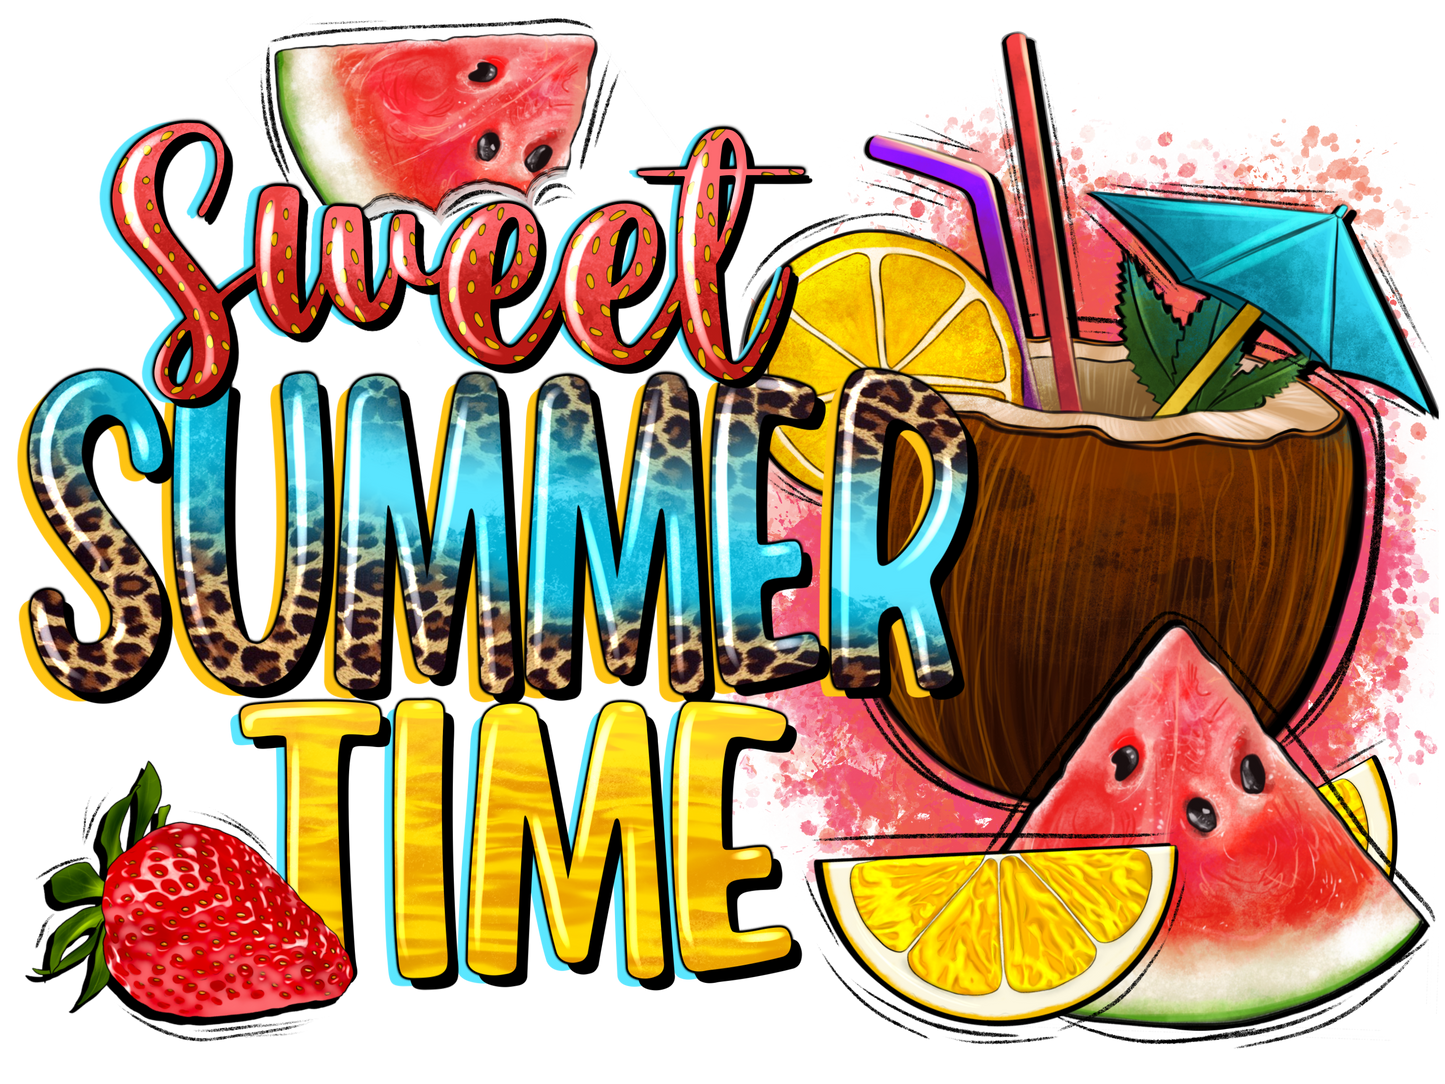 SWEET SUMMER TIME